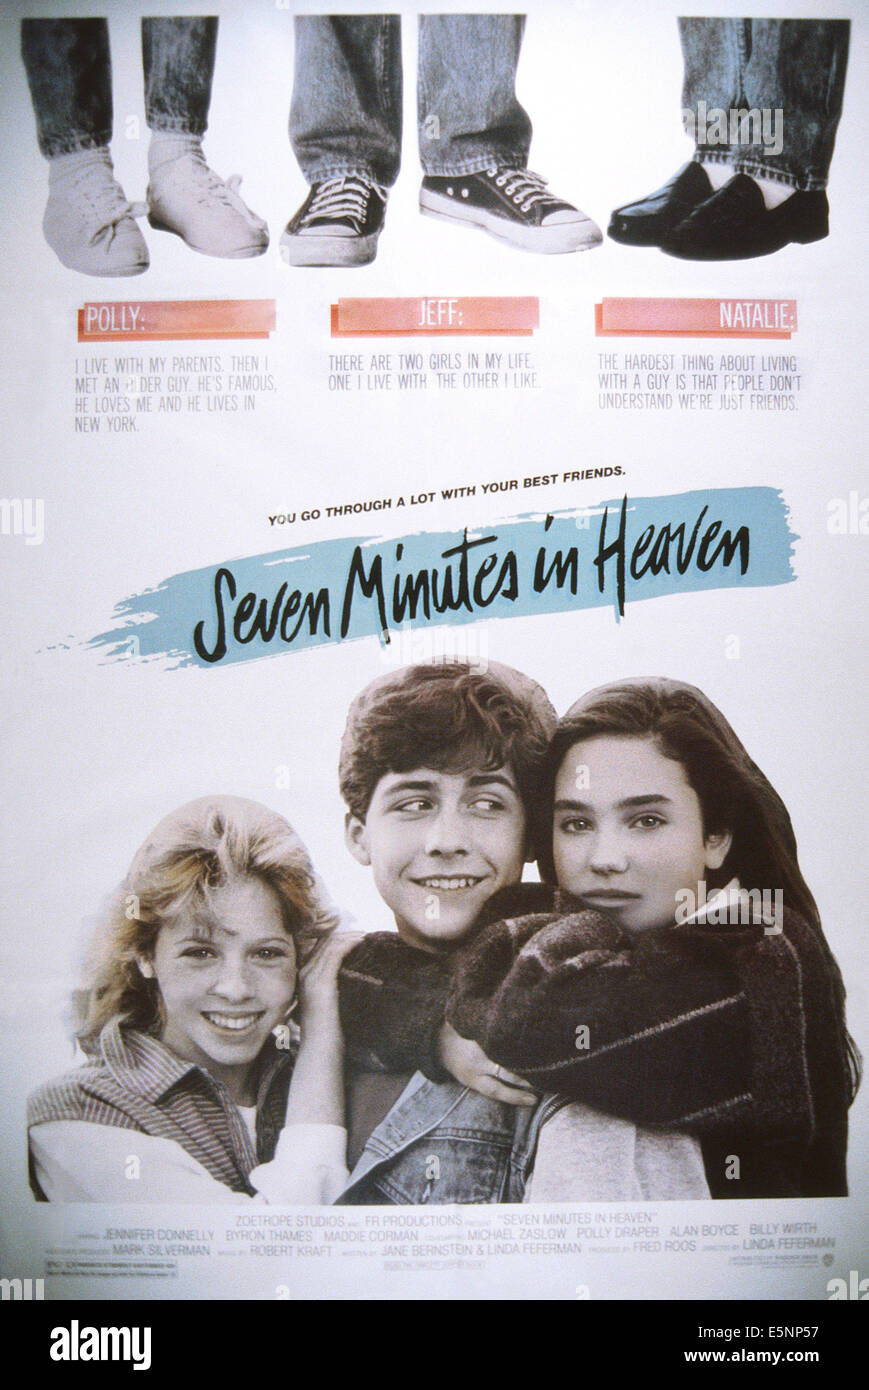 Seven Minutes In Heaven Us Poster Art From Left Maddie Corman Byron Thames Jennifer